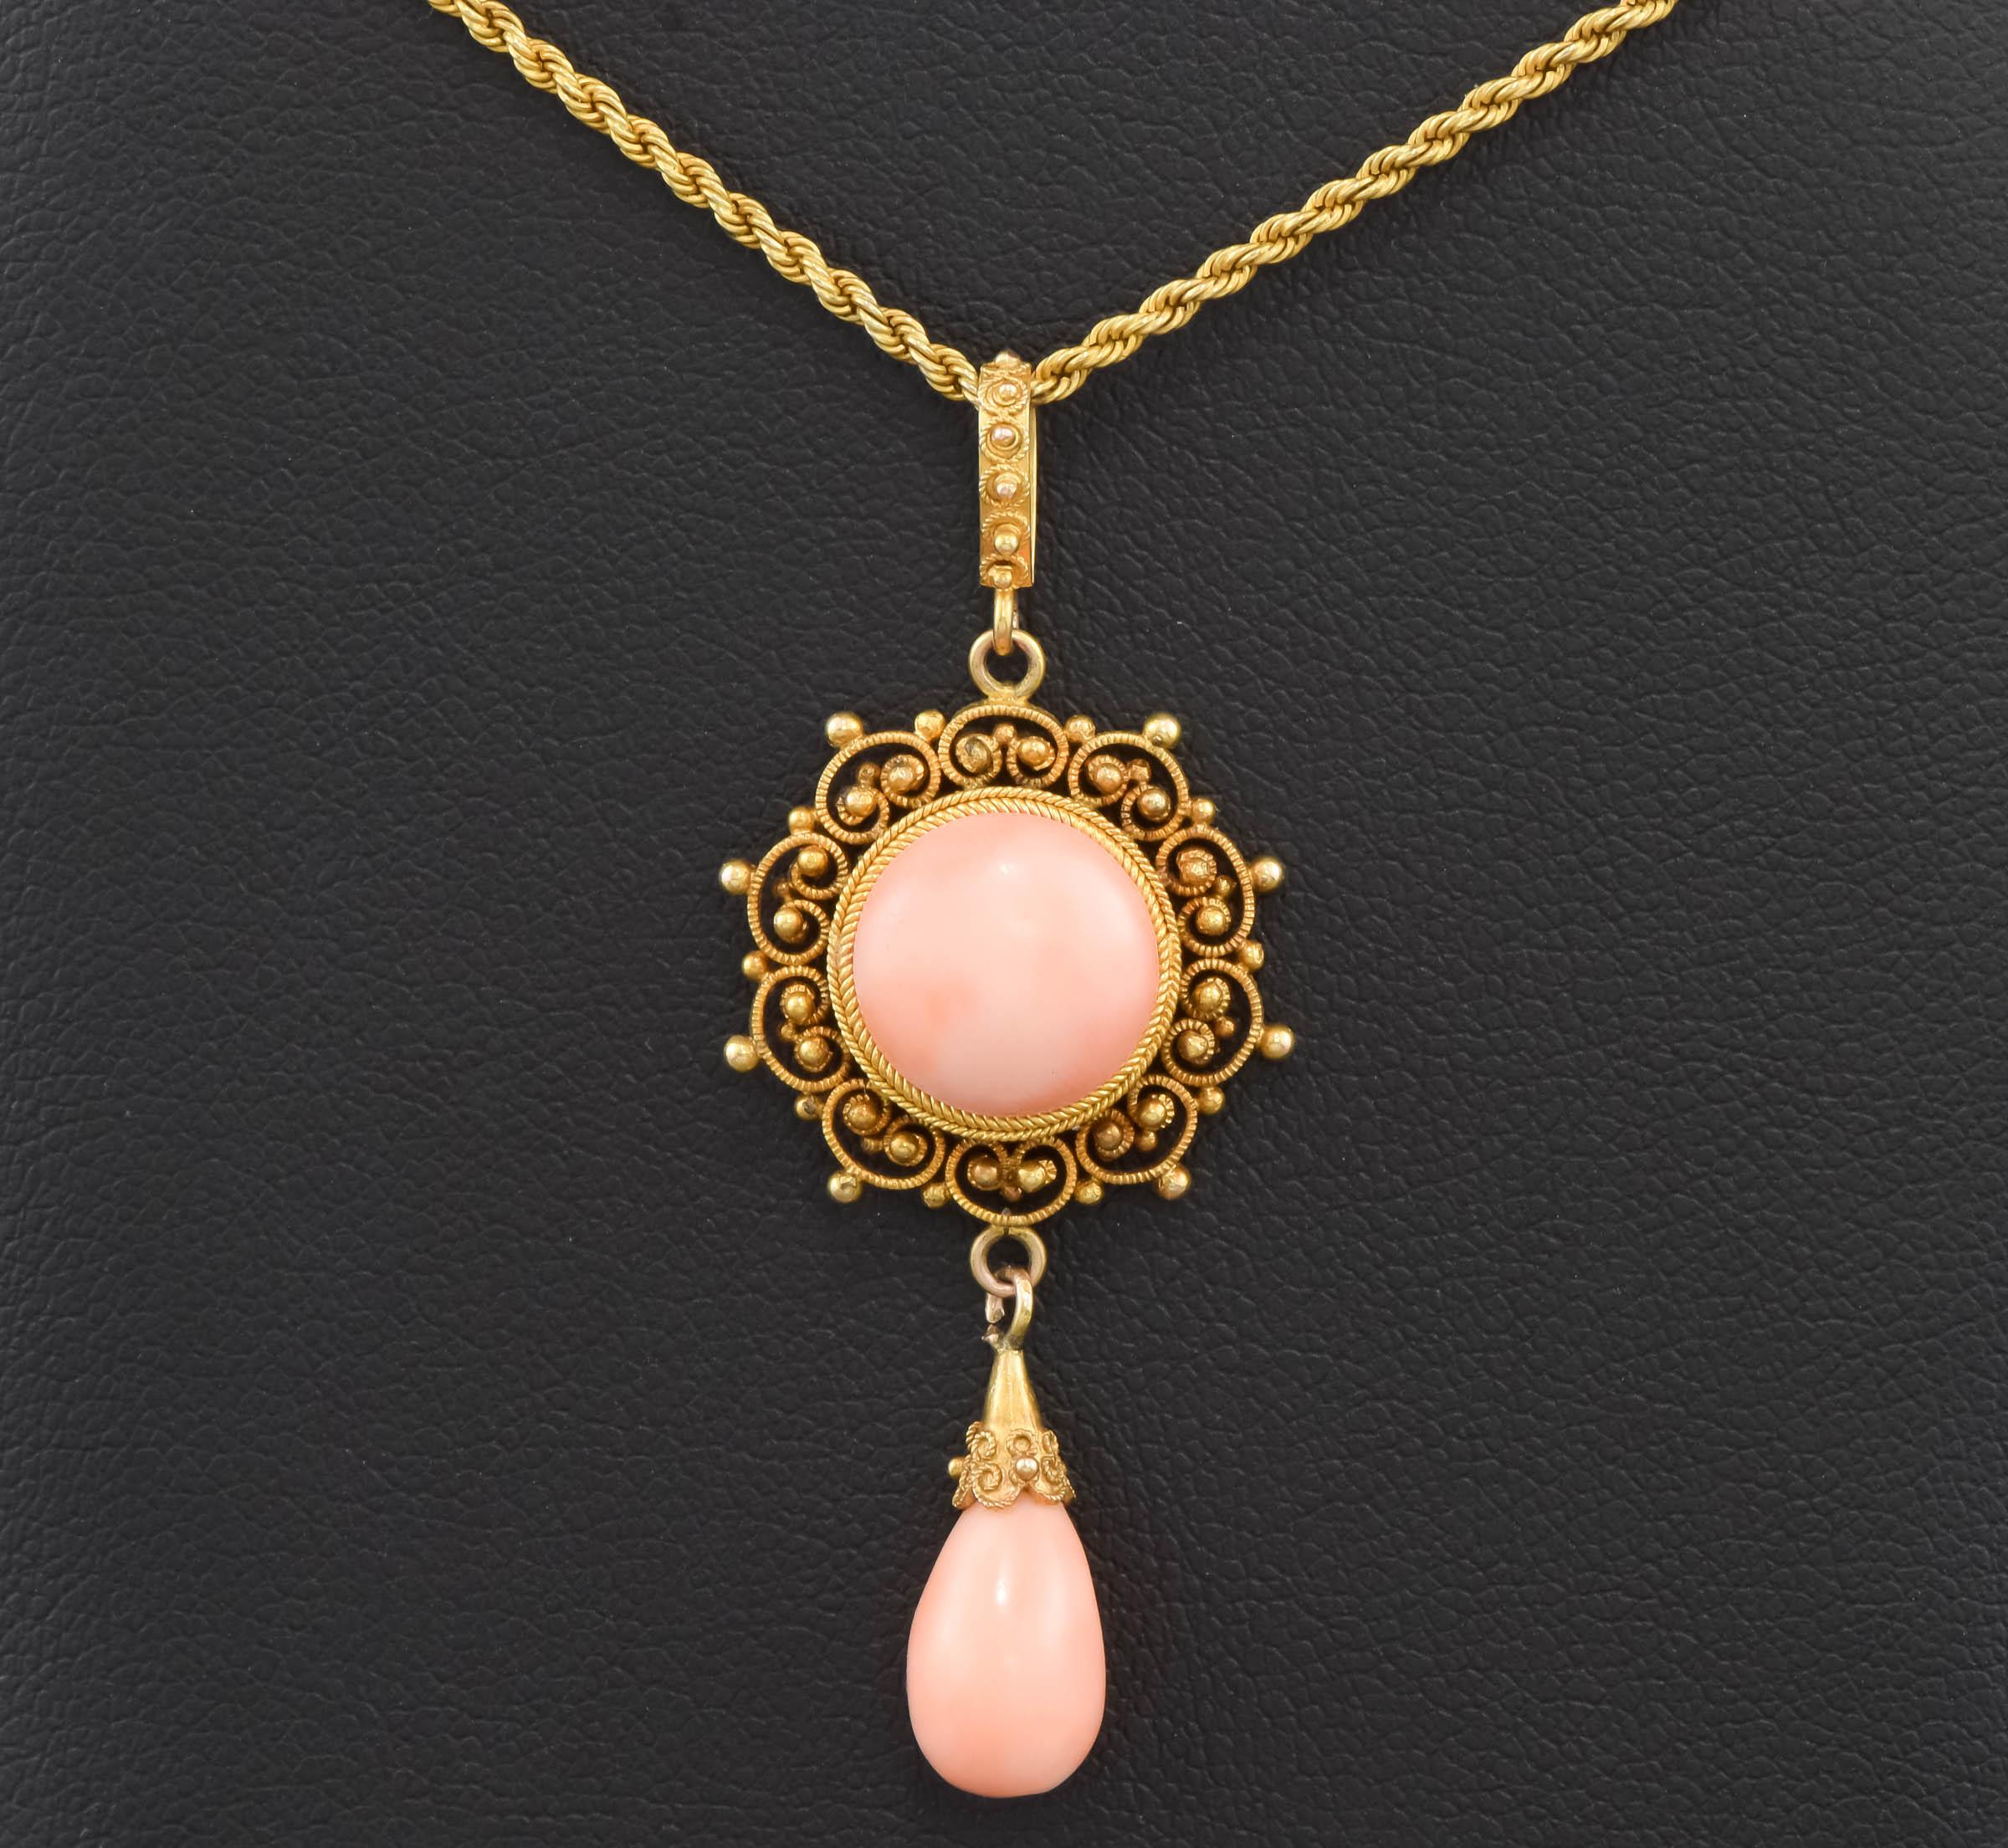 Offered is a lovely Victorian period angel skin coral necklace done in an Etruscan revival style.  It features beautiful detail work; the pendant is original to the chain, which is always extra nice.

I find no hallmarks but have tested the gold to